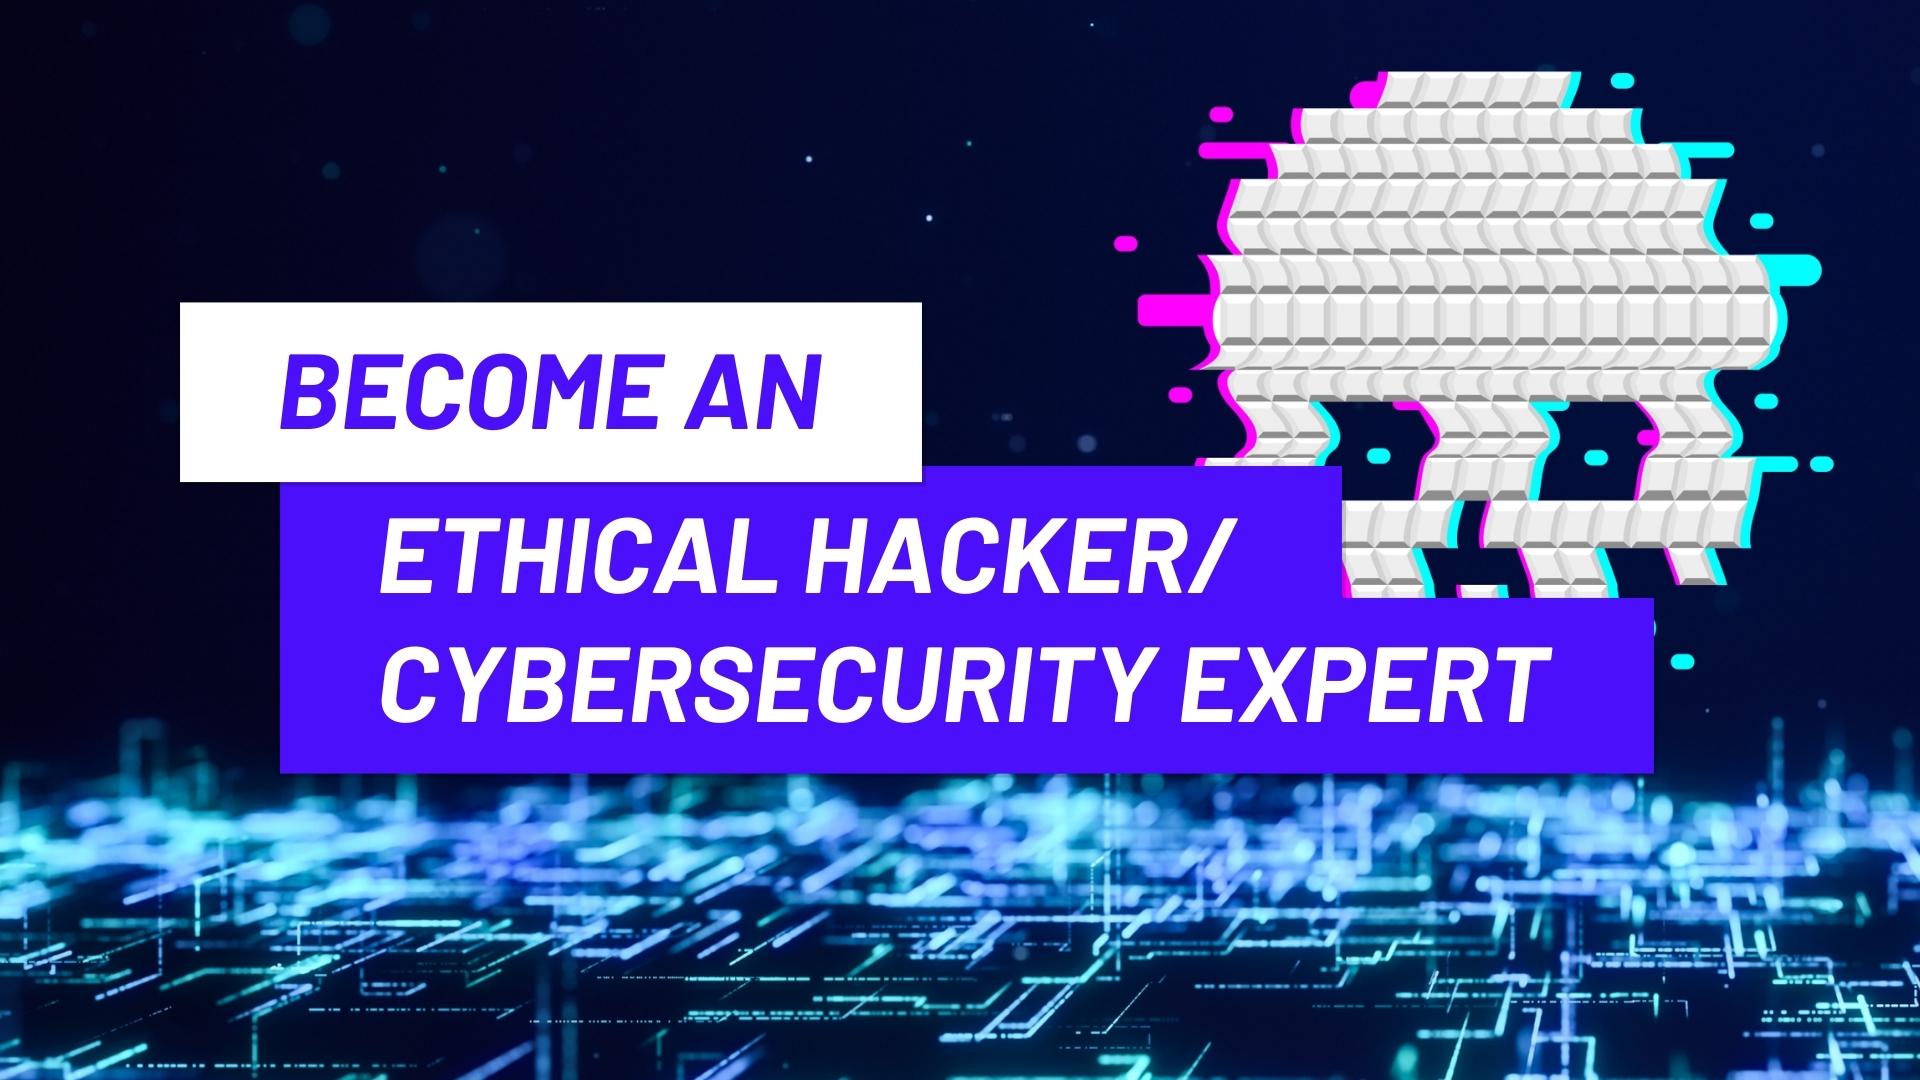 Hacking, Cybersecurity